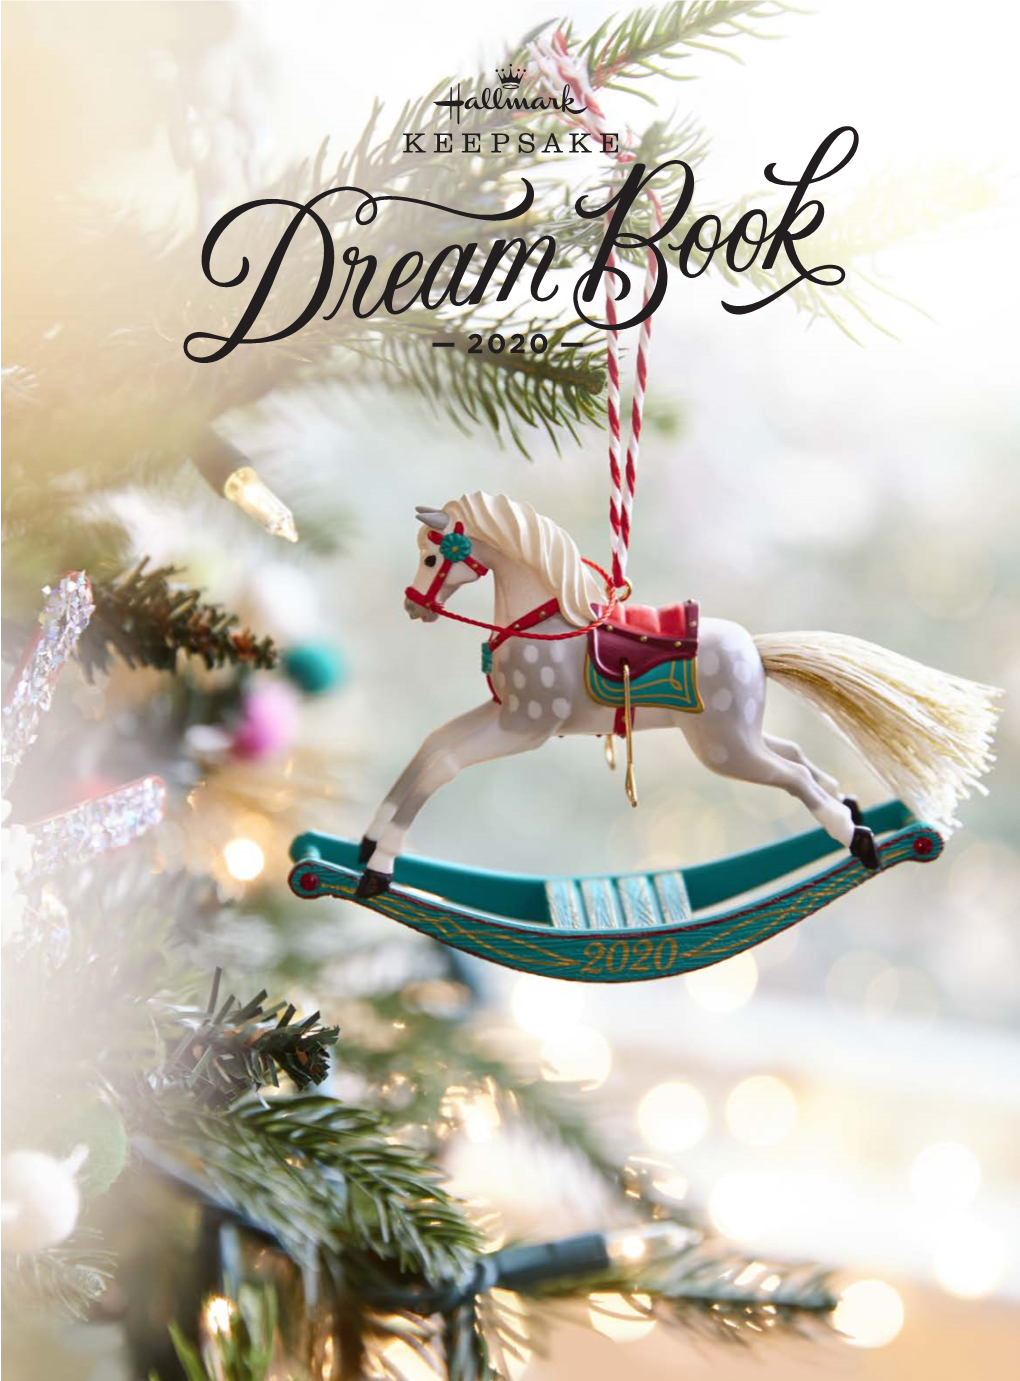 THE KEEPSAKE ORNAMENT CATALOG the Complete Catalog of the 2020 Collection, with Details for Every Christmas Tree Ornament and More CHAPTER 01